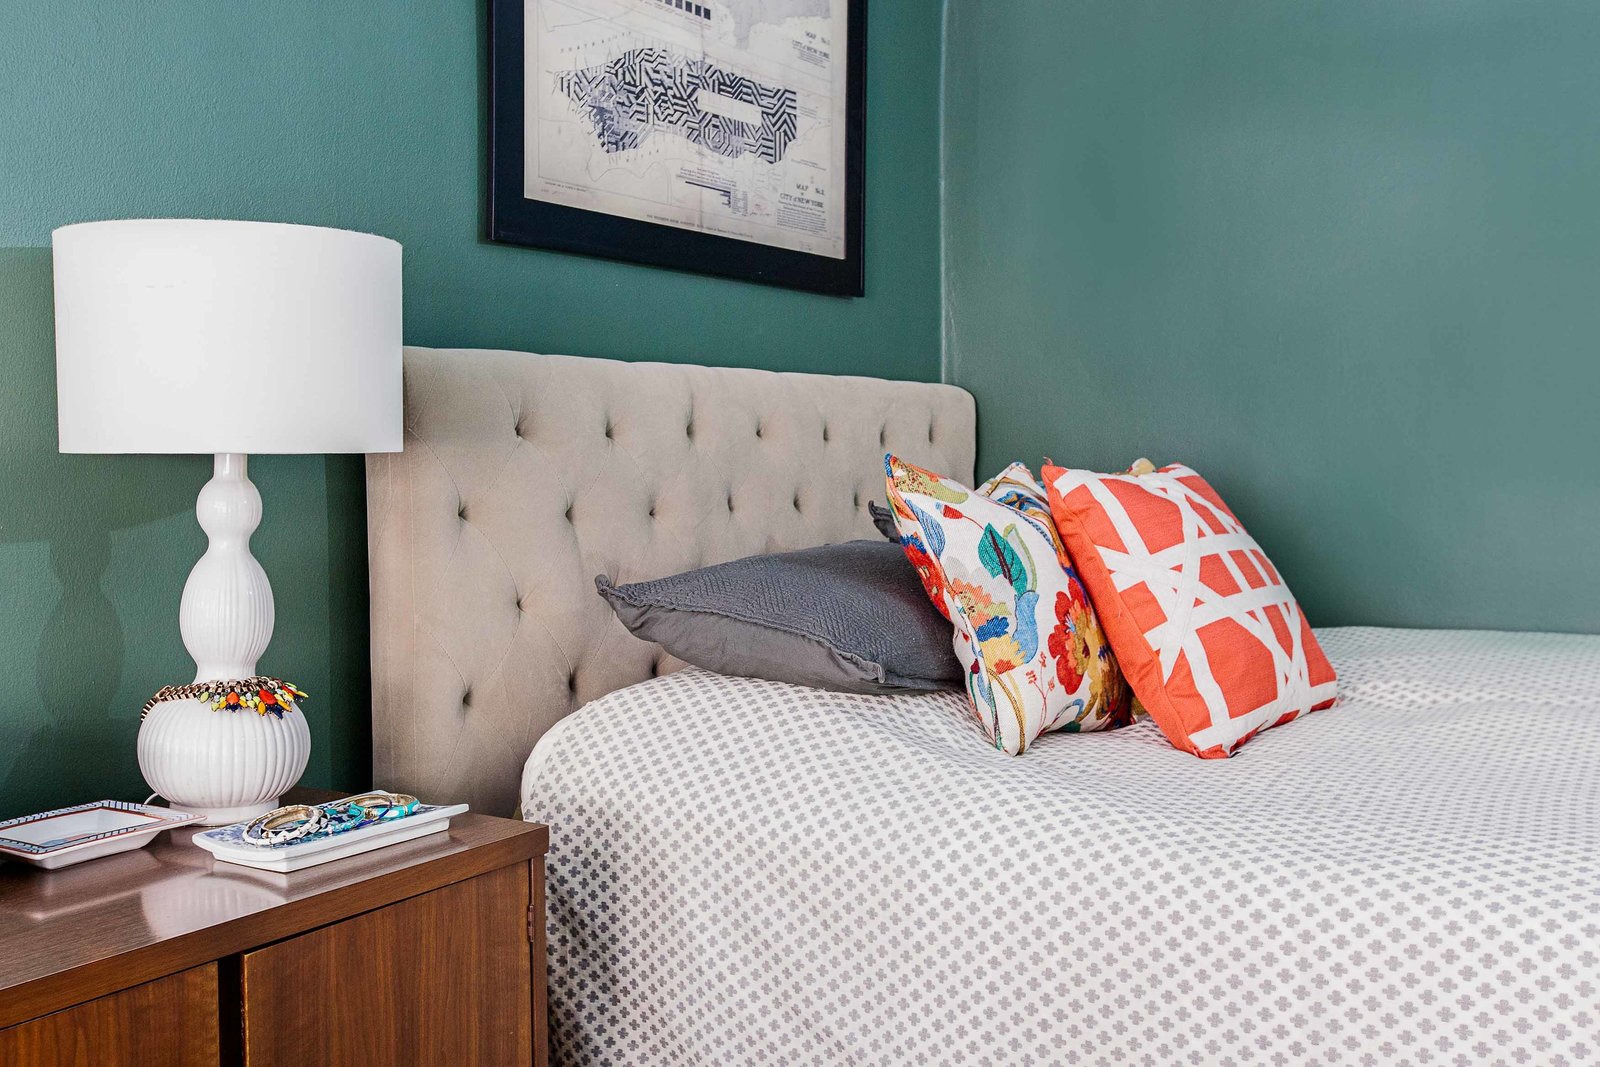 A bed with a tufted headboard and sideboard end table.